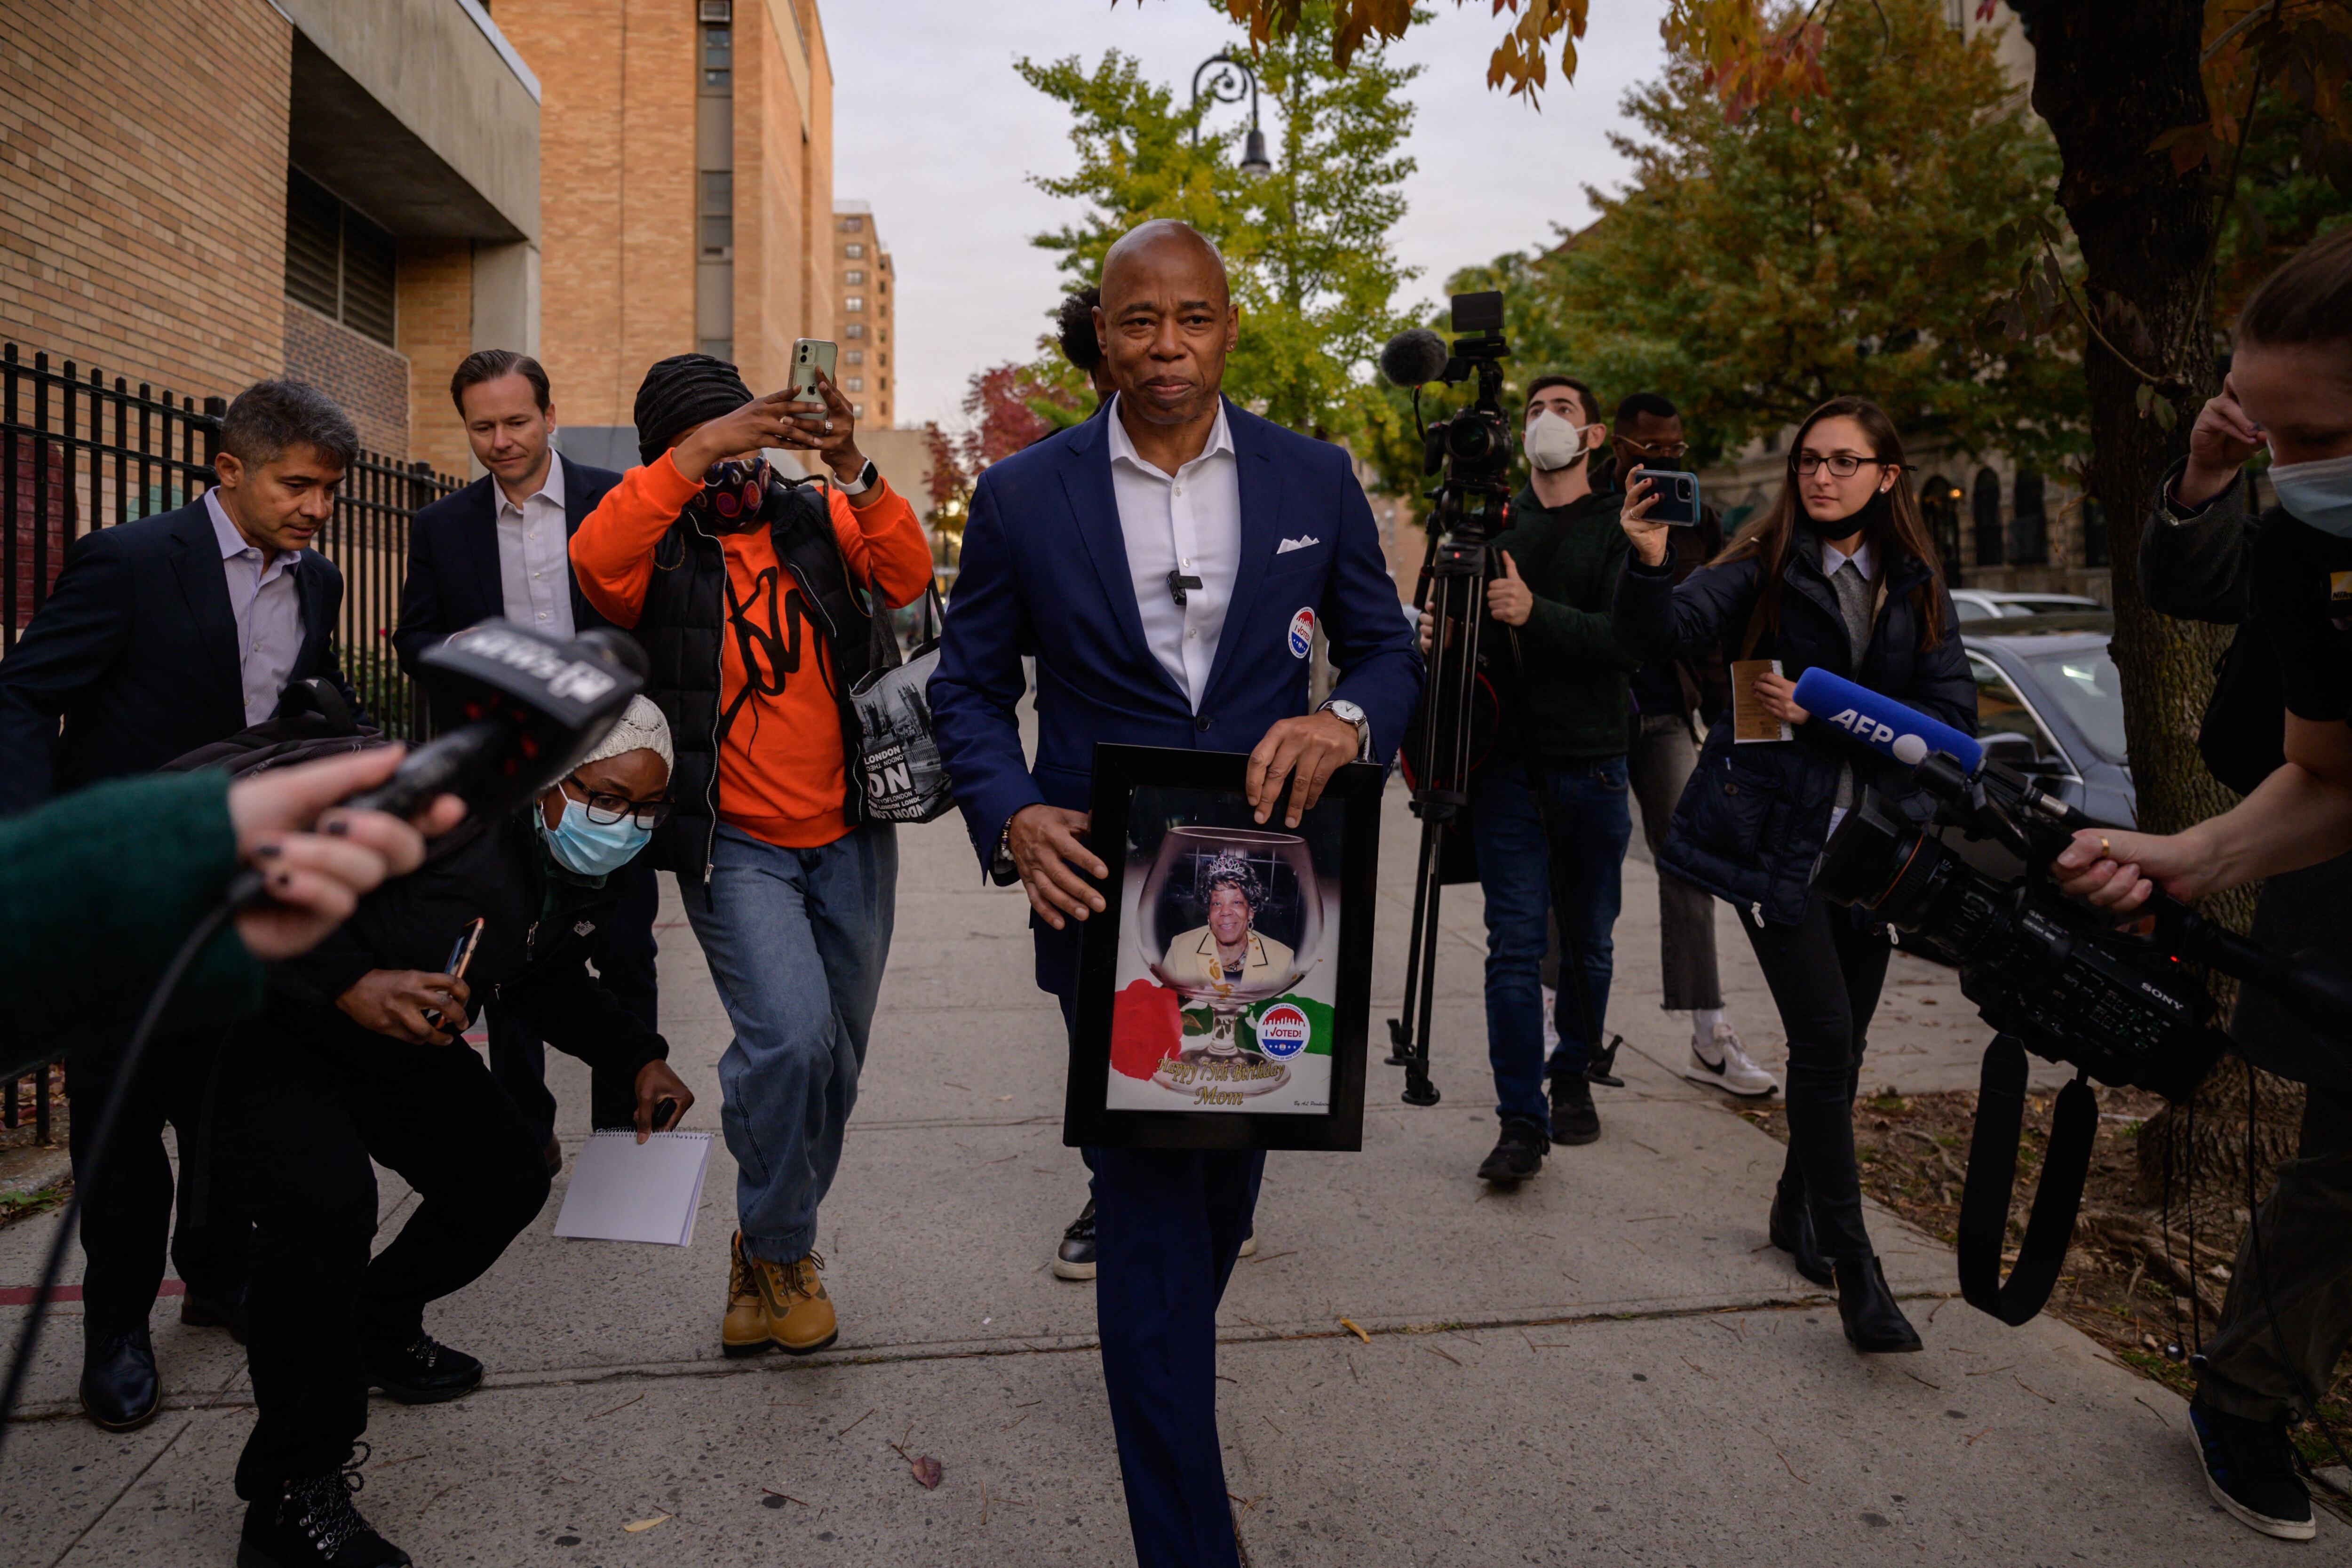 NYC mayoral candidate Eric Adams, the Democratic nominee, leaves his polling place holding a portrait of his mother as members of the media walk alongside him.